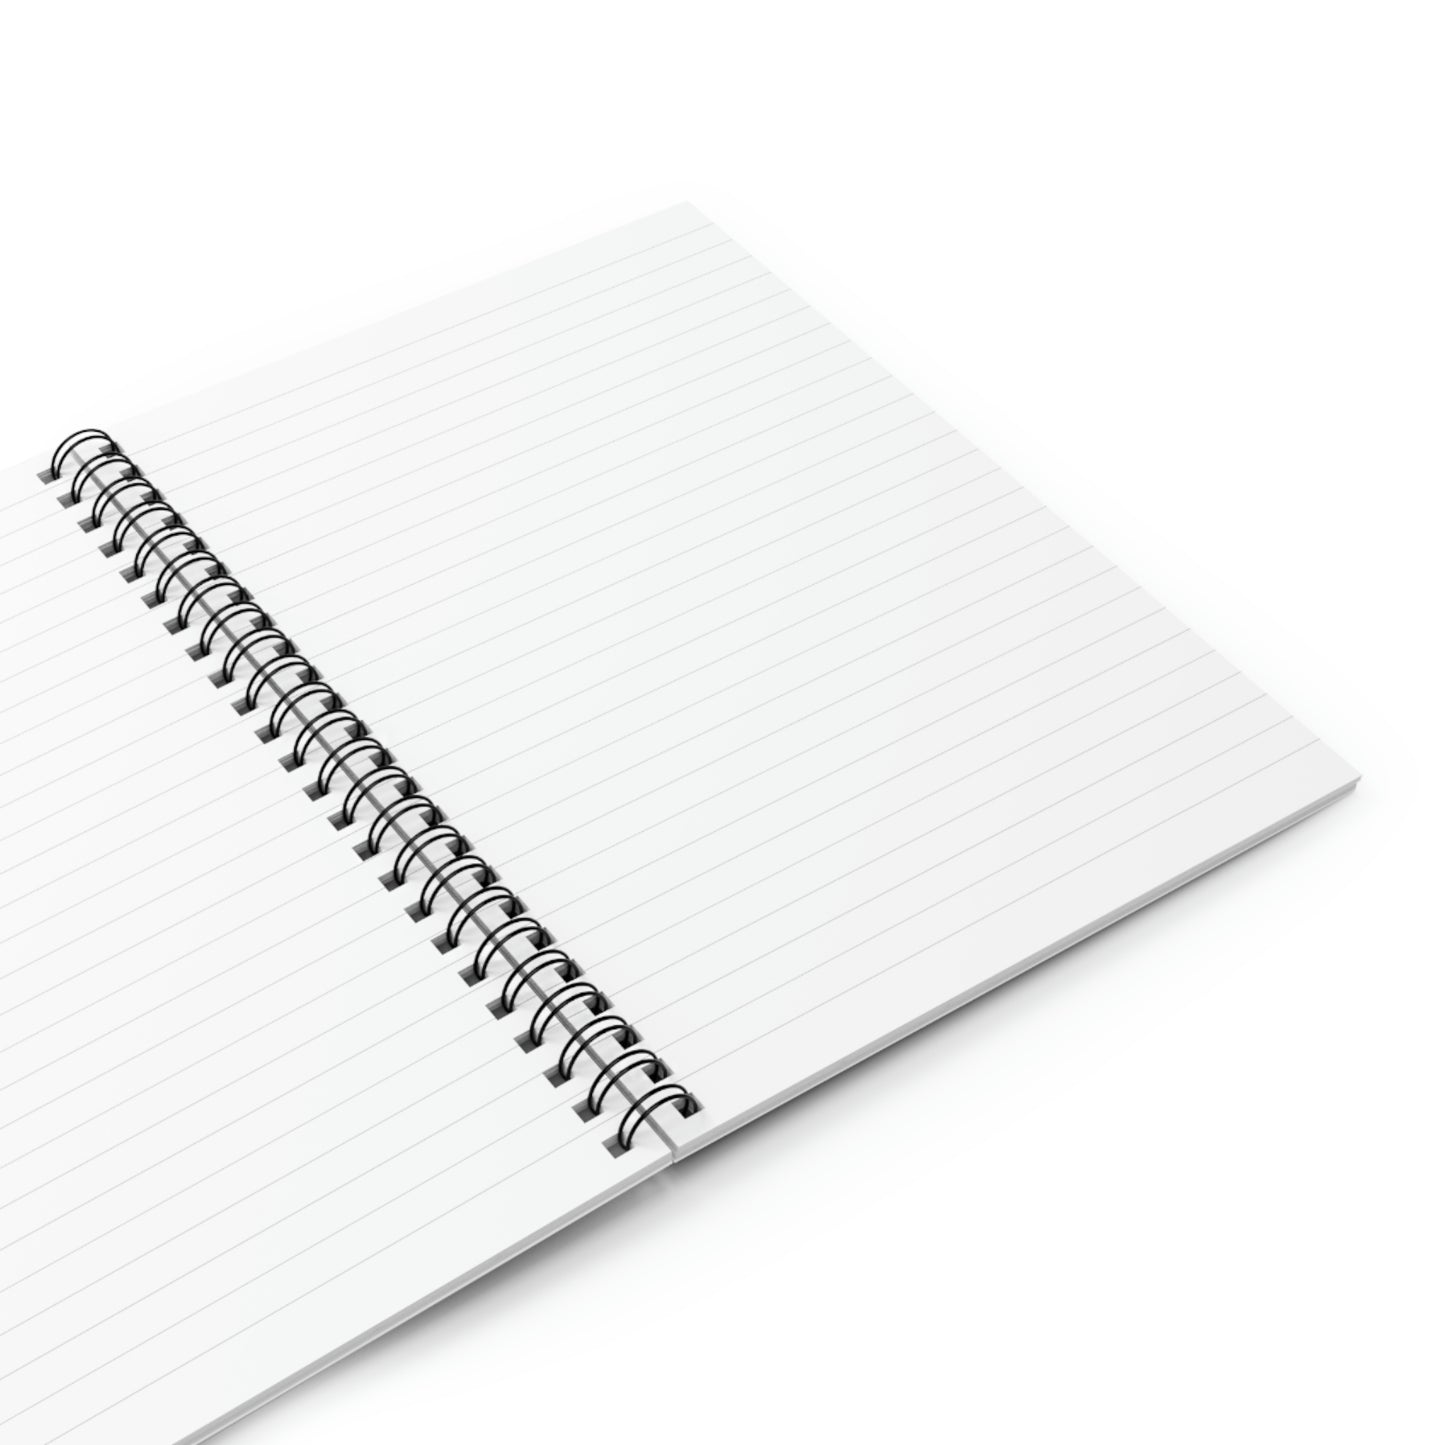 My CEO Life - Spiral Notebook - Ruled Line - Monogram